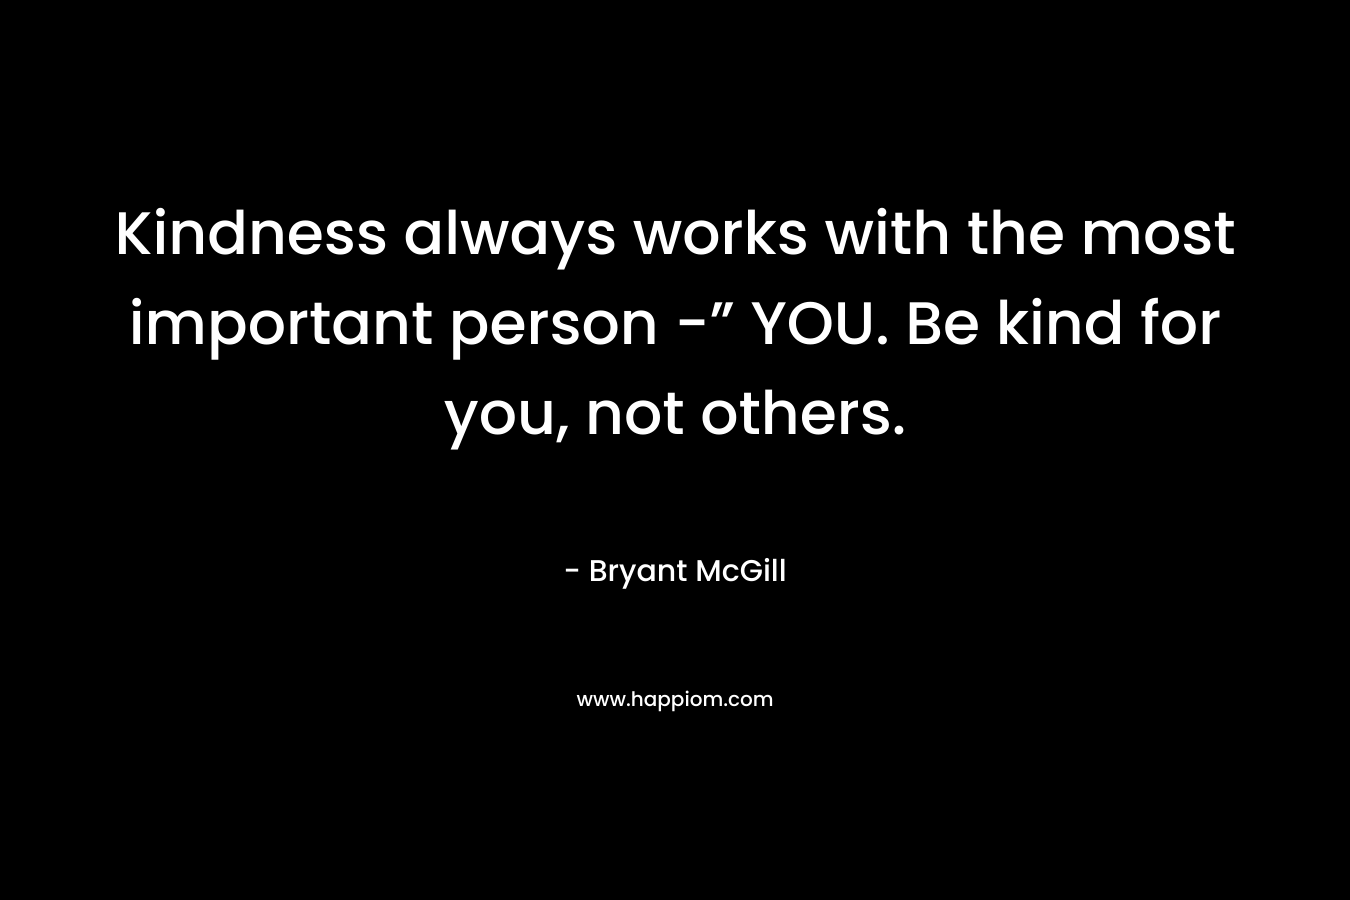 Kindness always works with the most important person -” YOU. Be kind for you, not others.